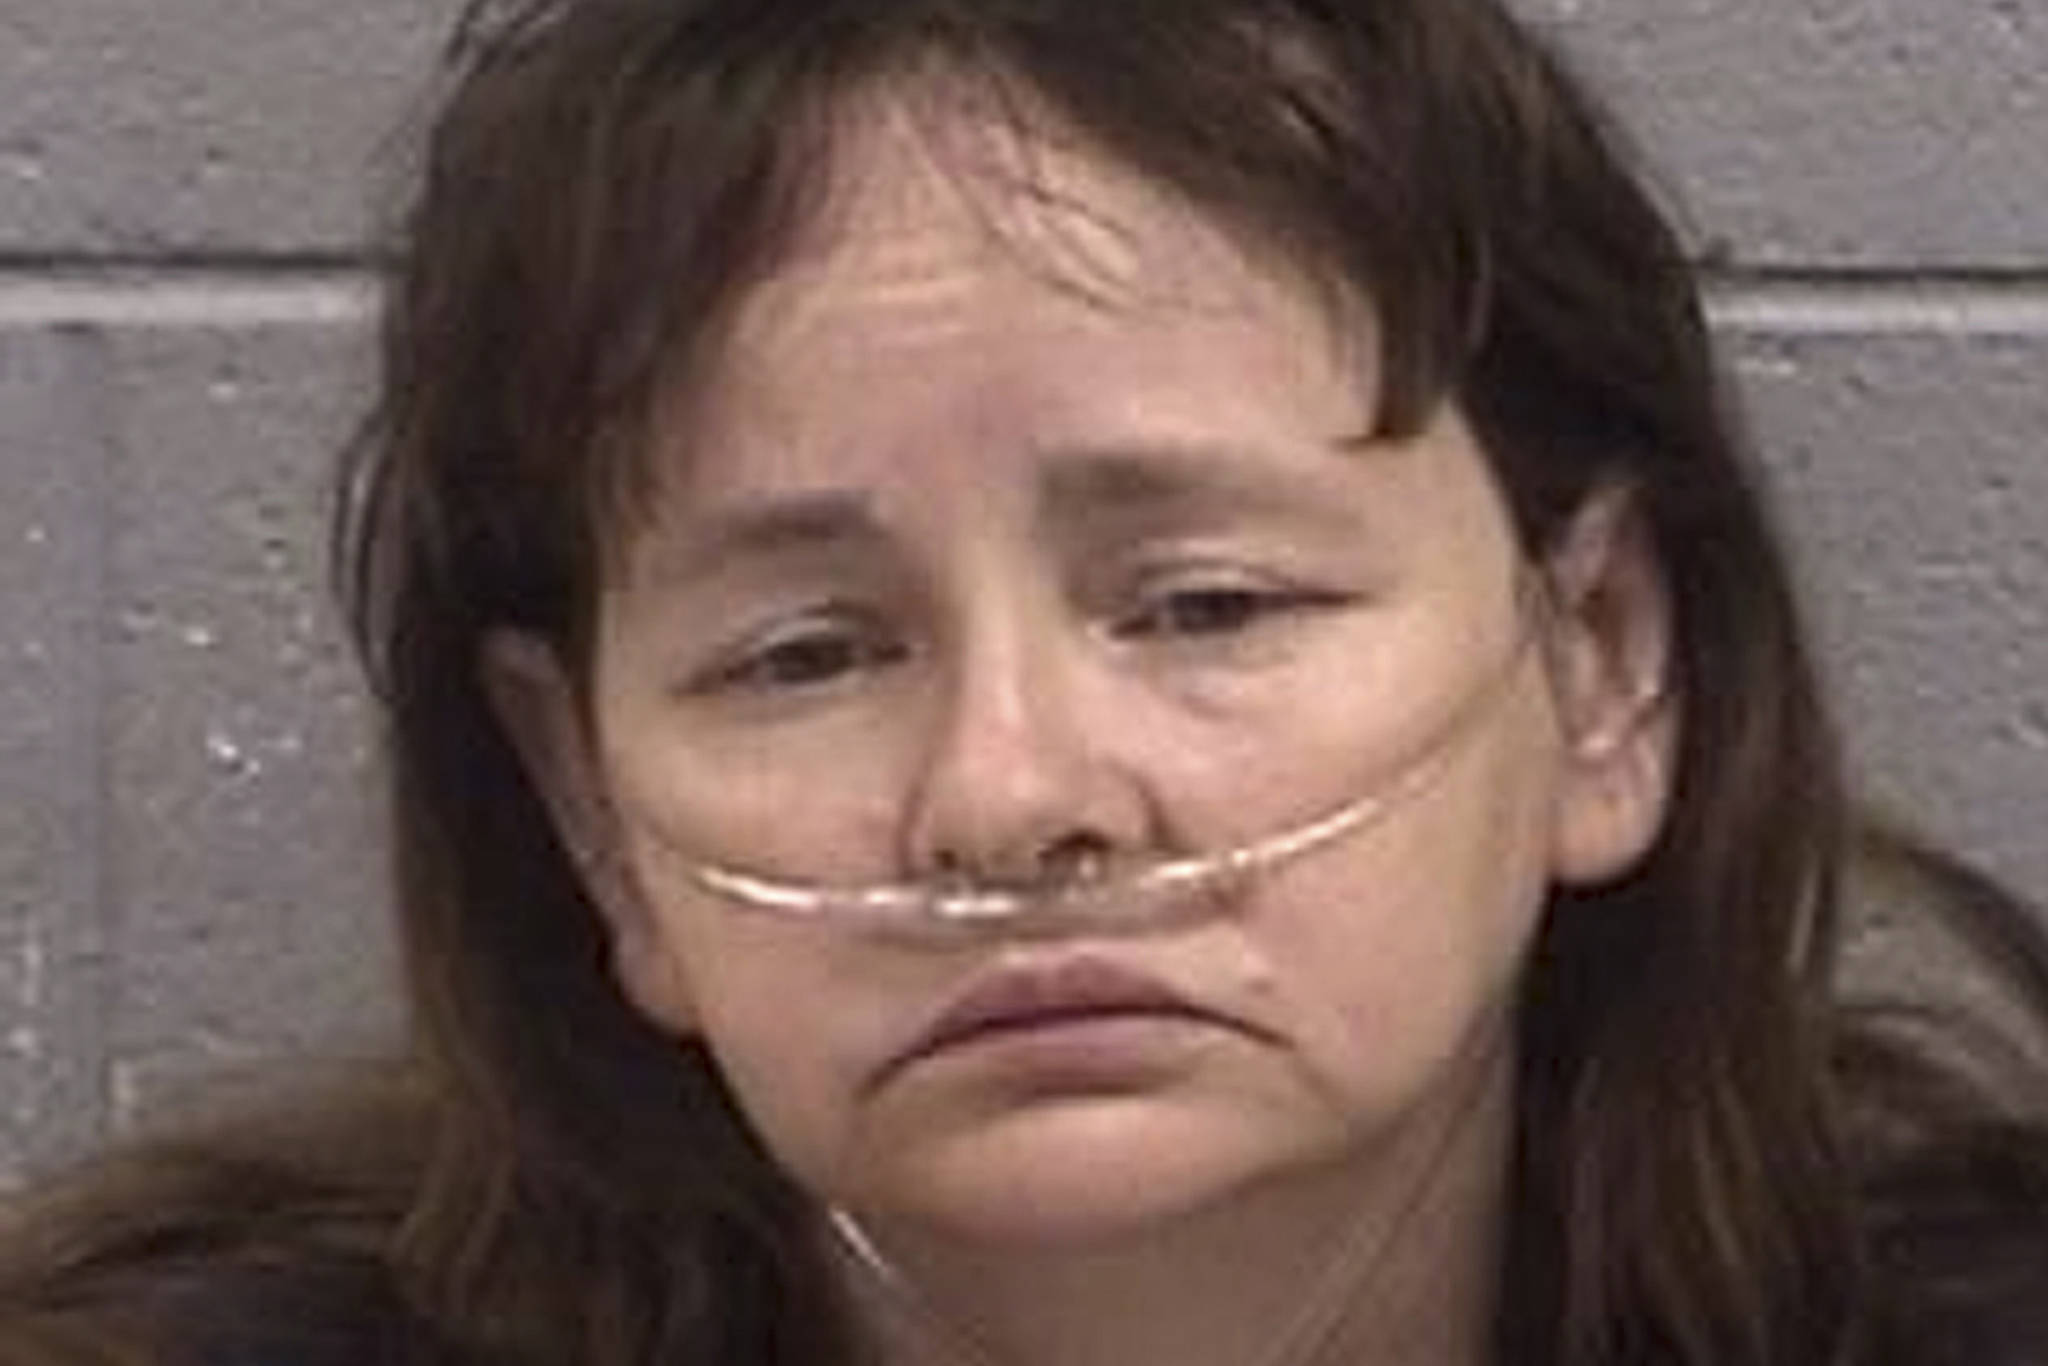 Sheriff: Mom abused her children, boiled puppies to death